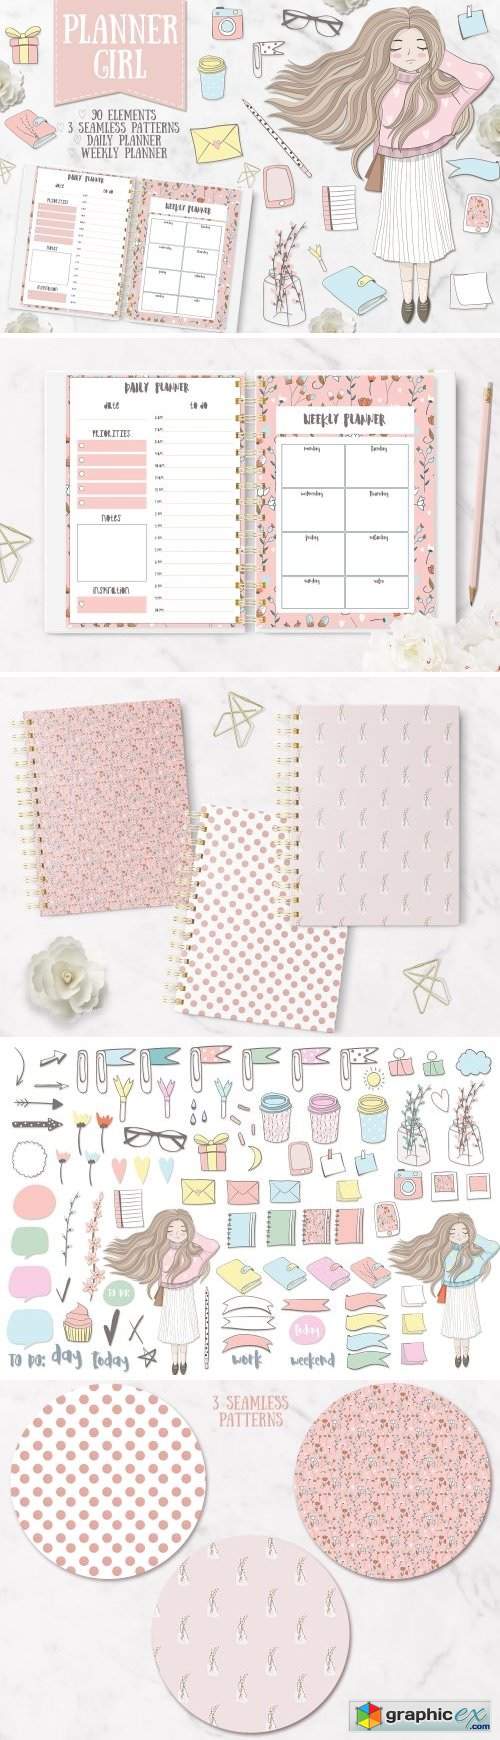 Planner Girl. Weekly & daily